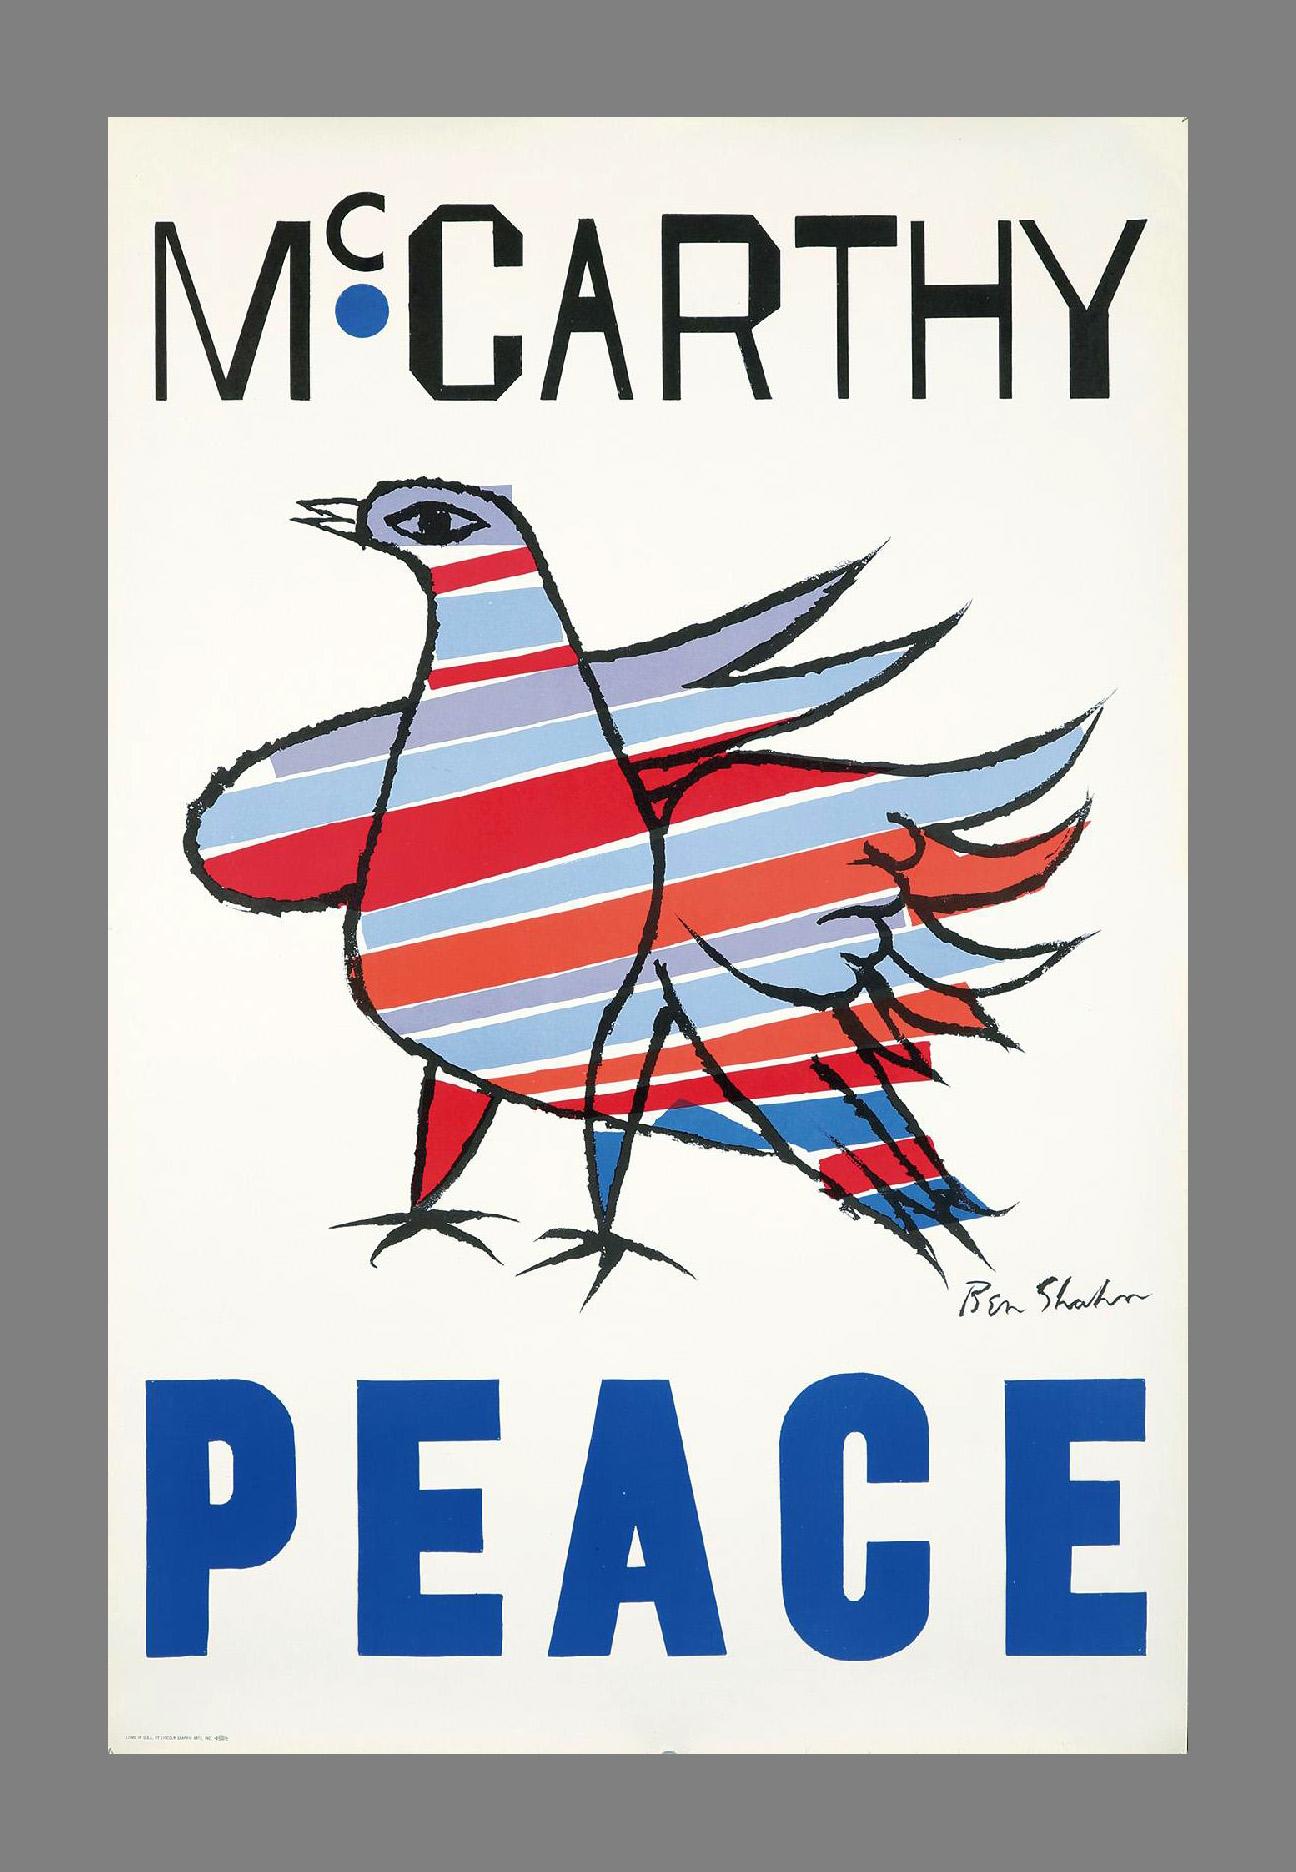 Ben Shahn McCarthy Peace poster, 1968.
When Eugene McCarthy ran for U.S. president in 1968 against incumbent Lyndon Johnson, his candidacy was based on his opposition to the war in Vietnam that was obliterating American troops, resources and unity.